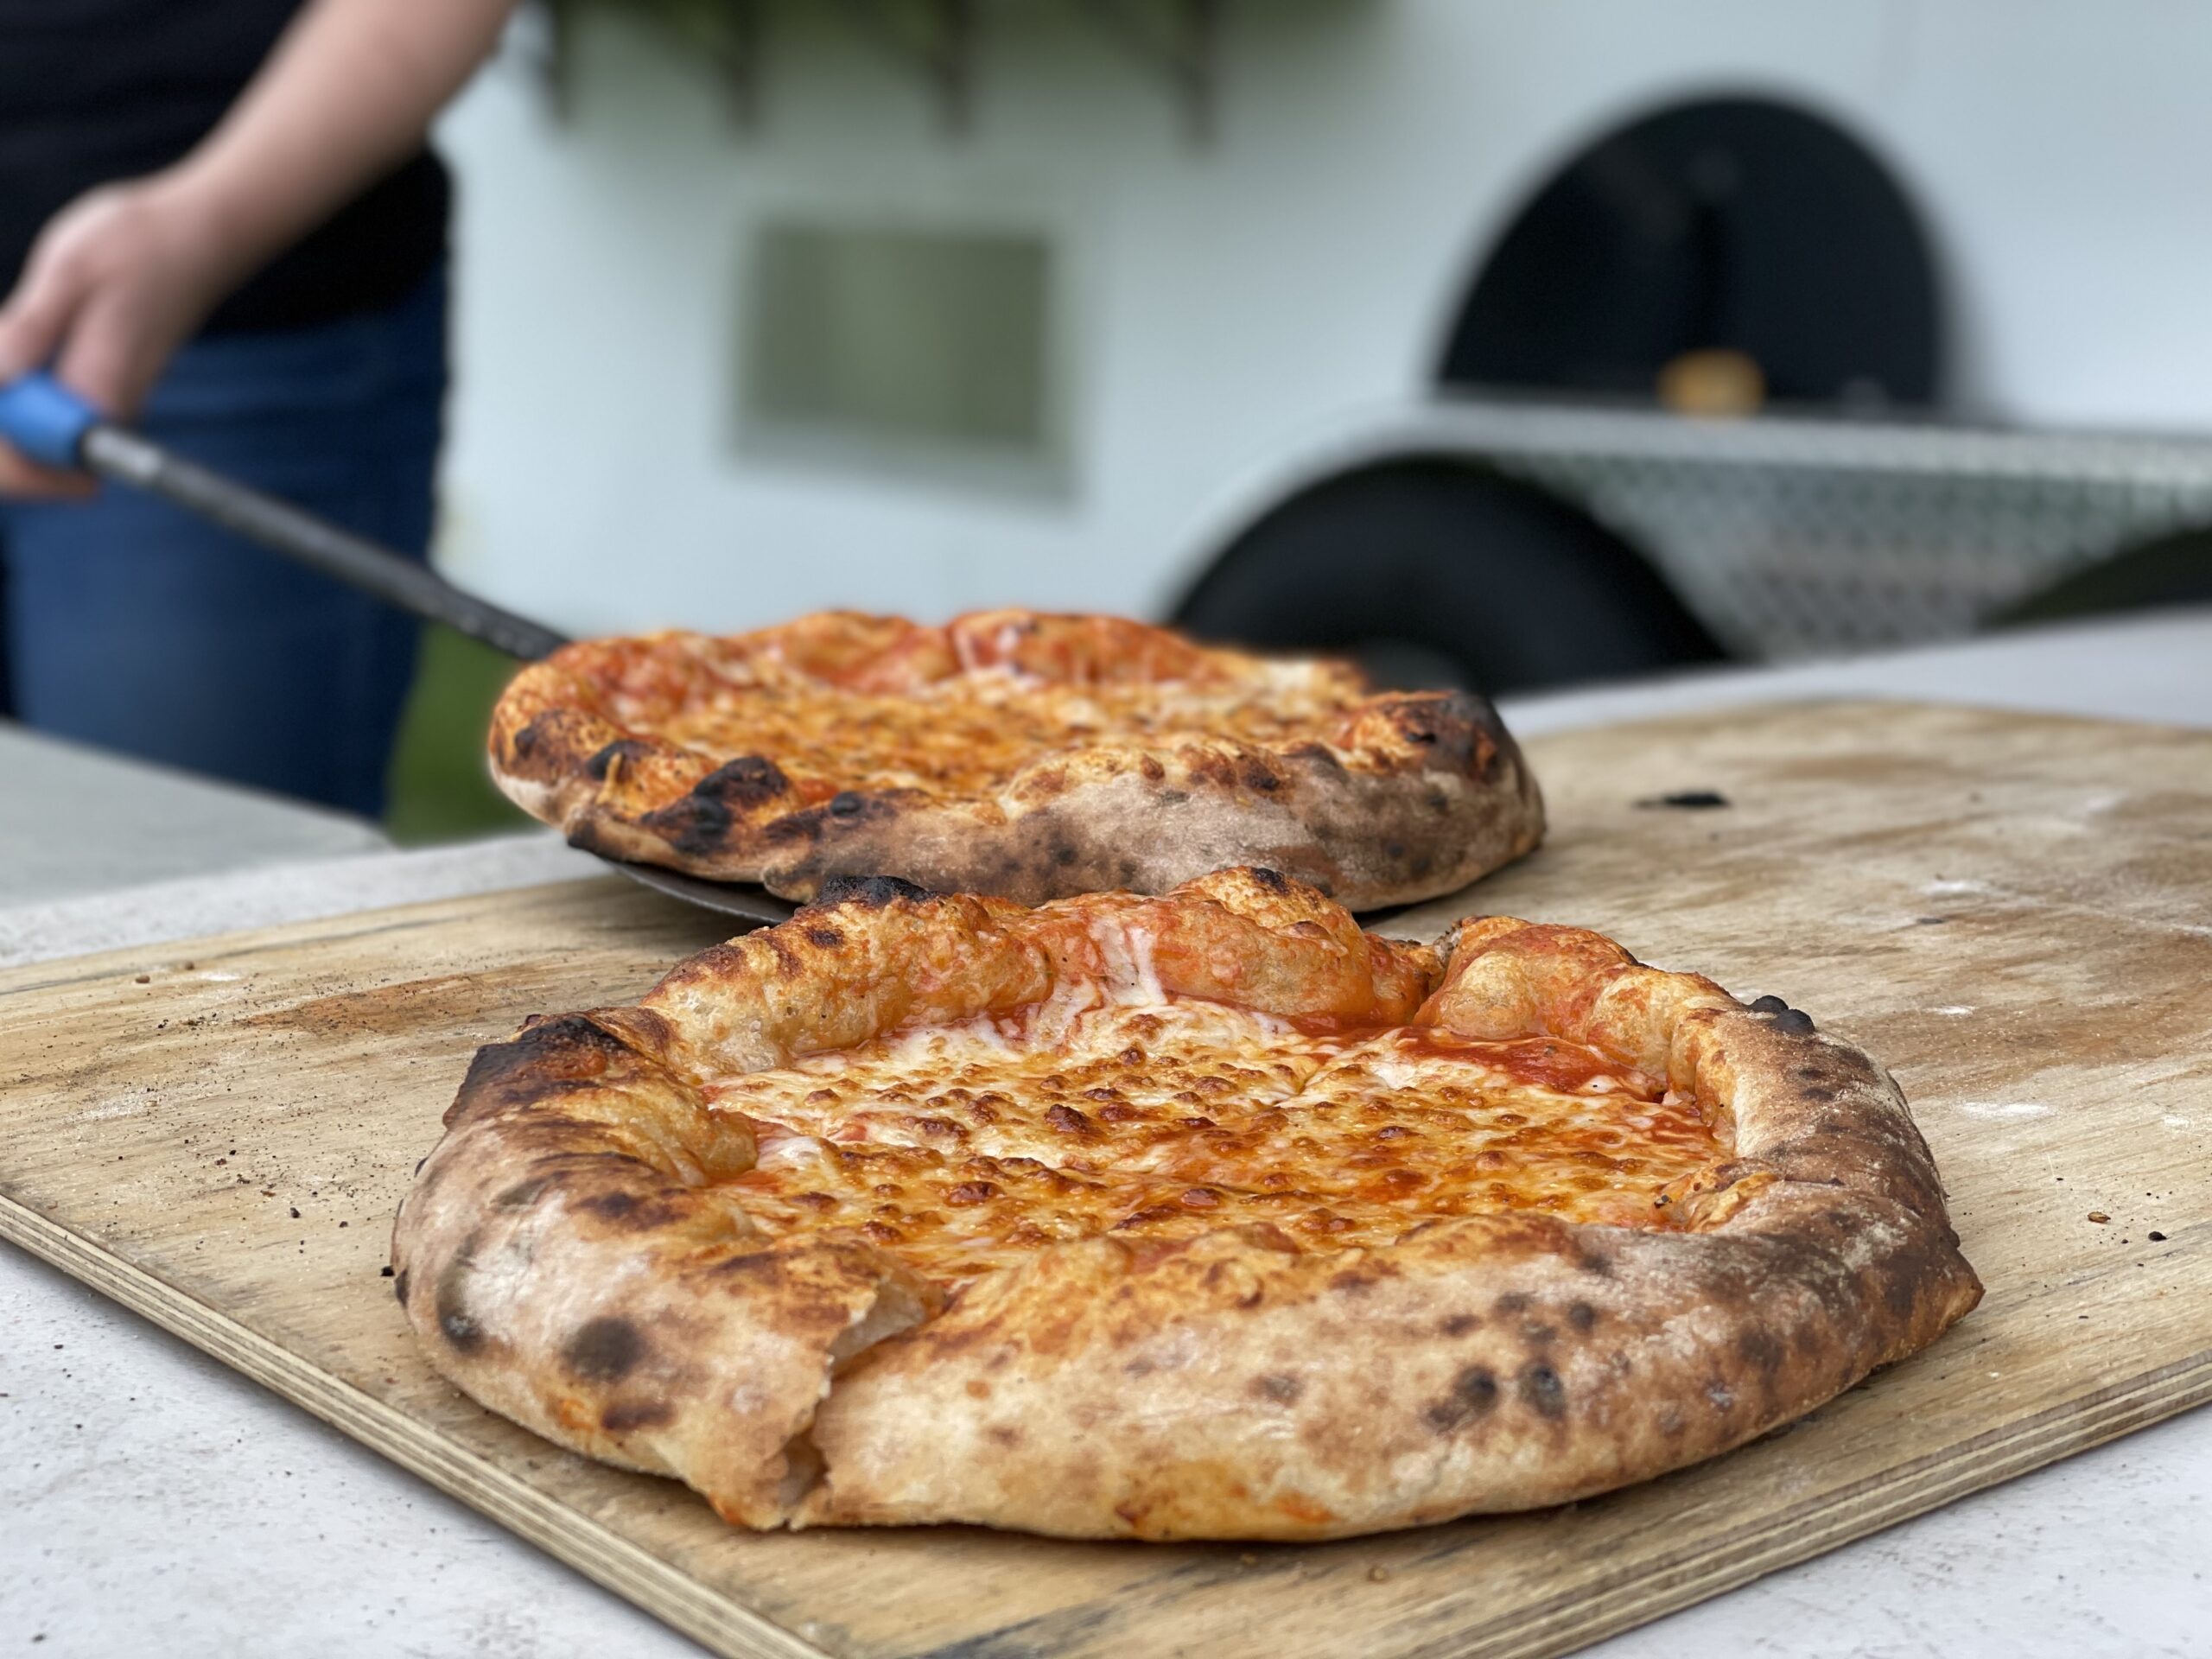 Wood-grilled pizza